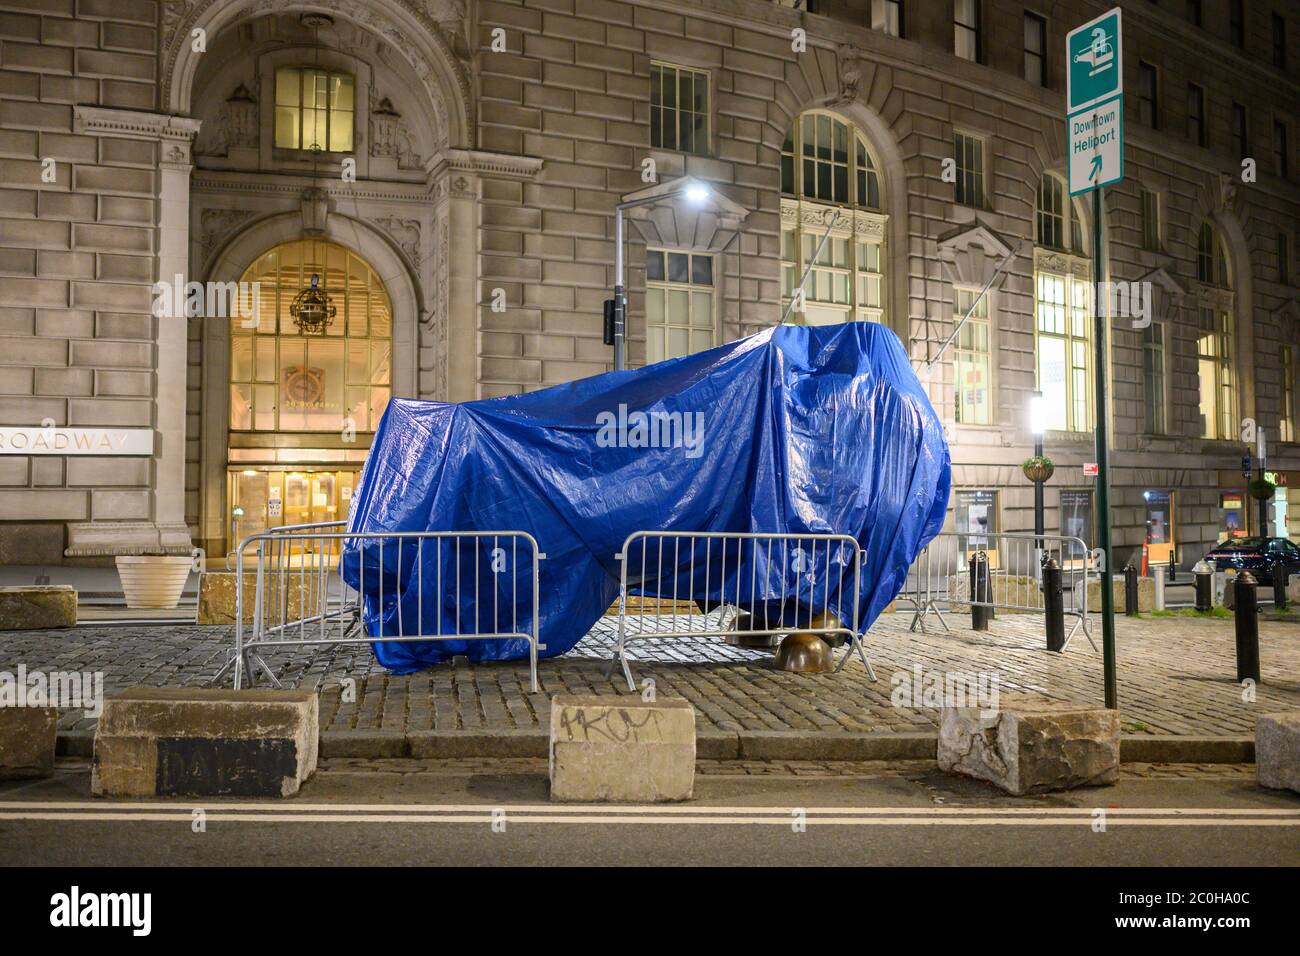 The famous Wall Street Bull covered up. Presumably to keep crowds away attempting to take photos during the pandemic. Stock Photo